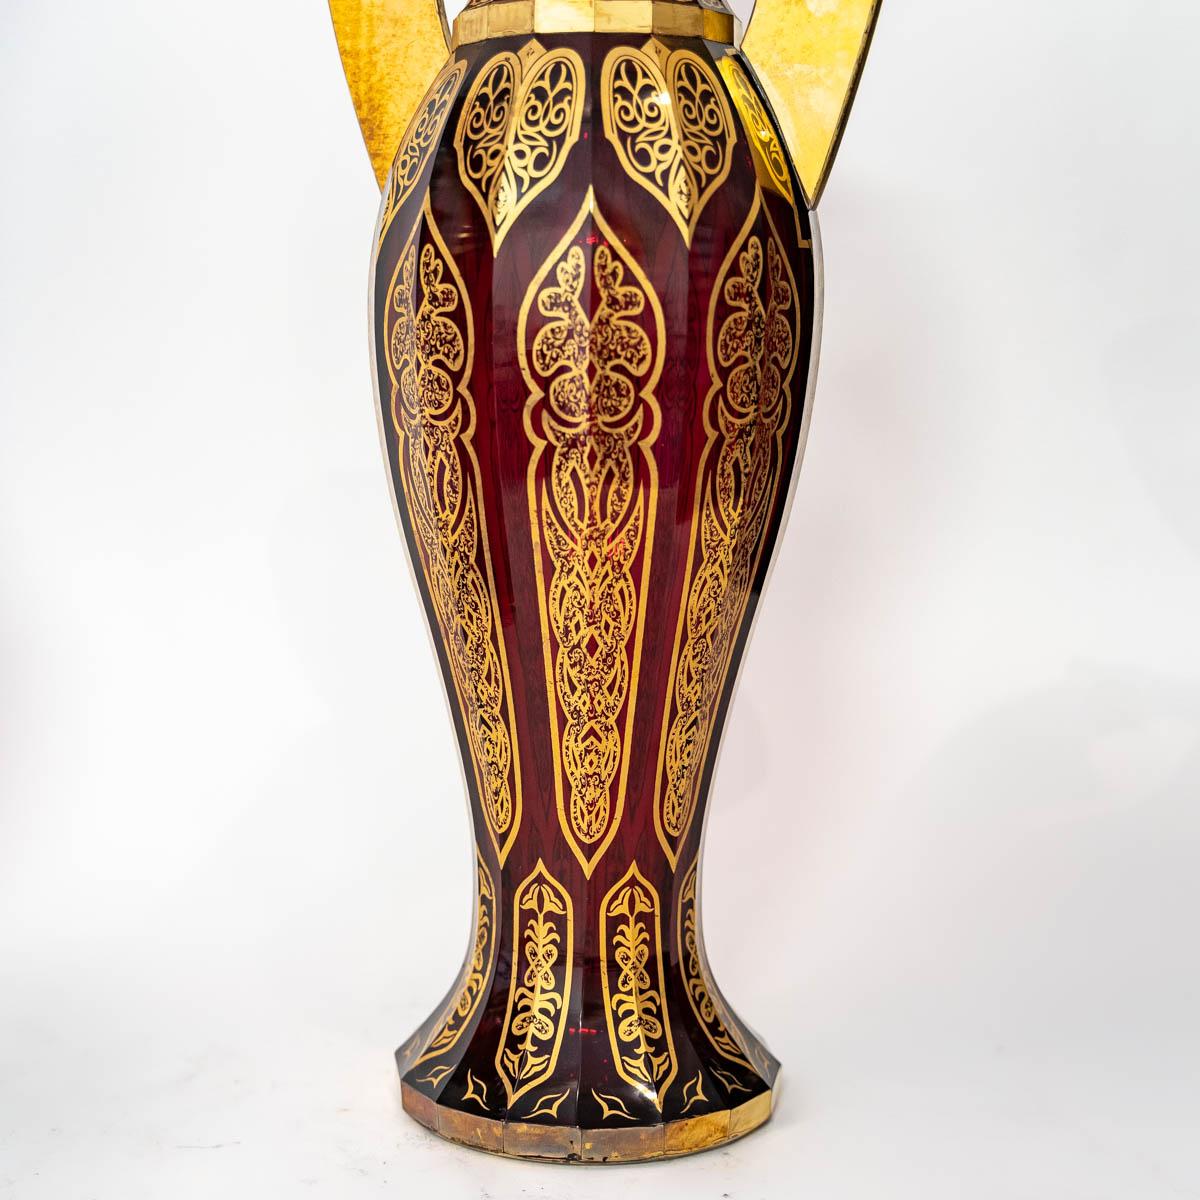 European Pair of Bohemian Cut Crystal Vases in Ruby Red and Gold, 19th Century For Sale